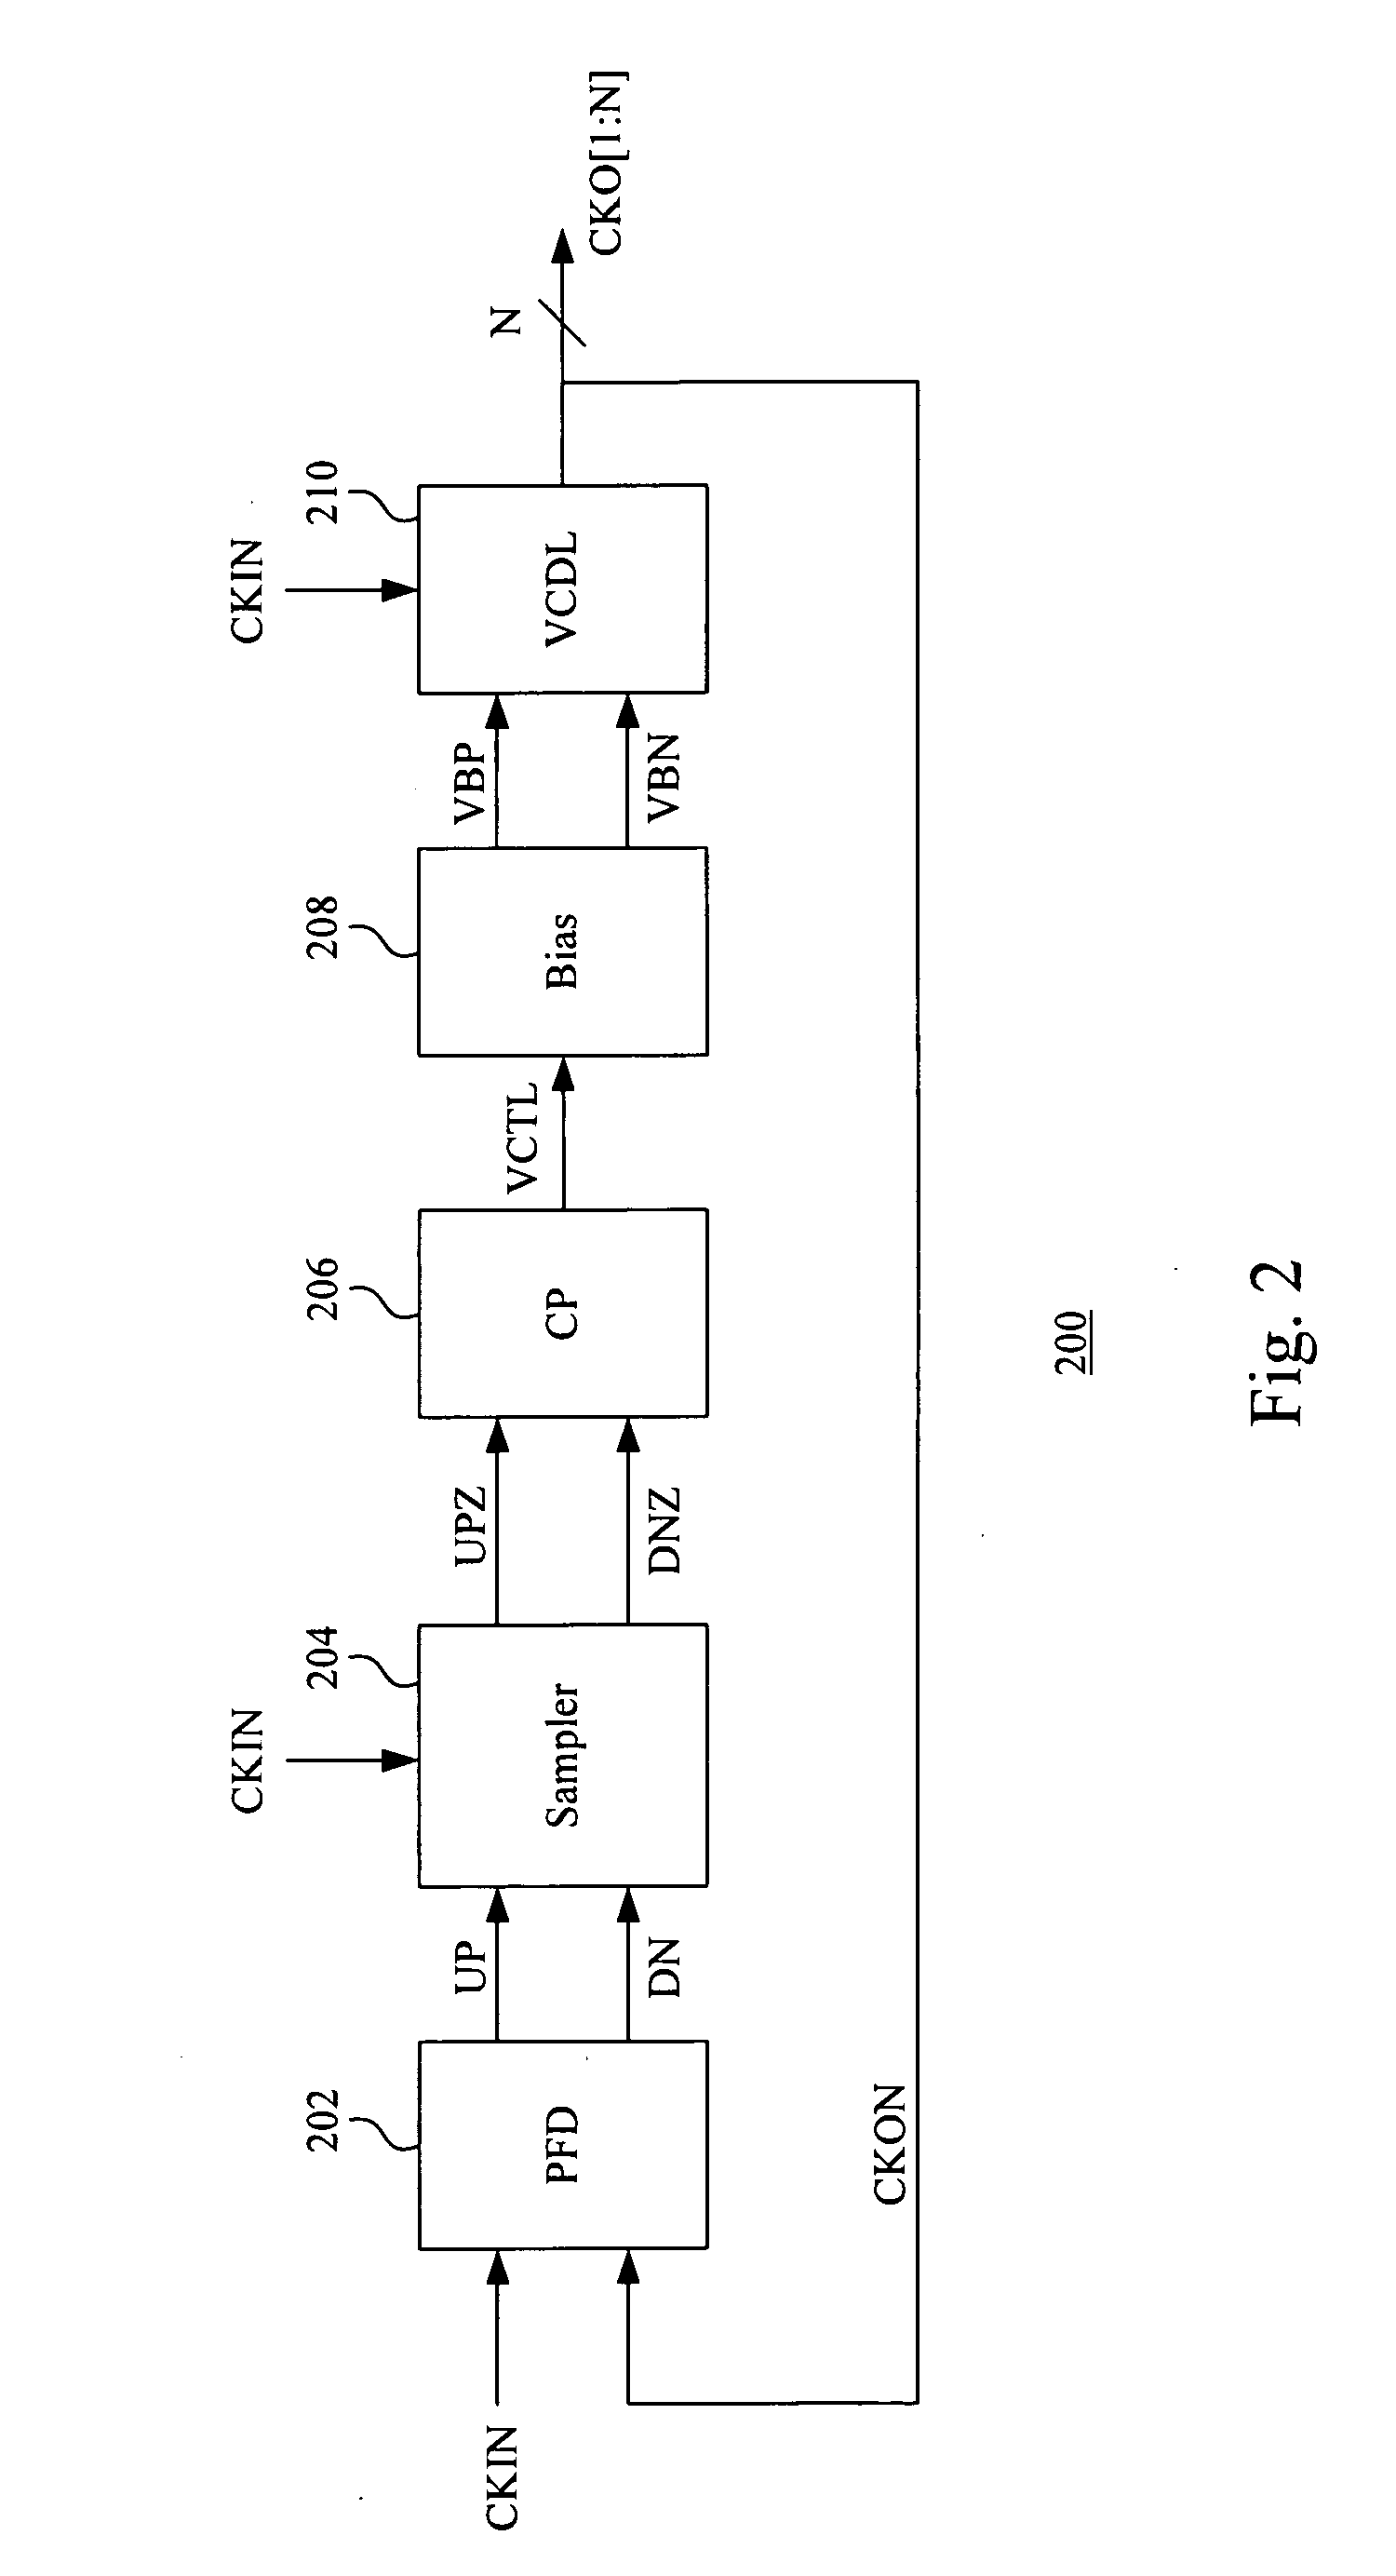 Delay locked loop circuit and method for eliminating jitter and offset therein